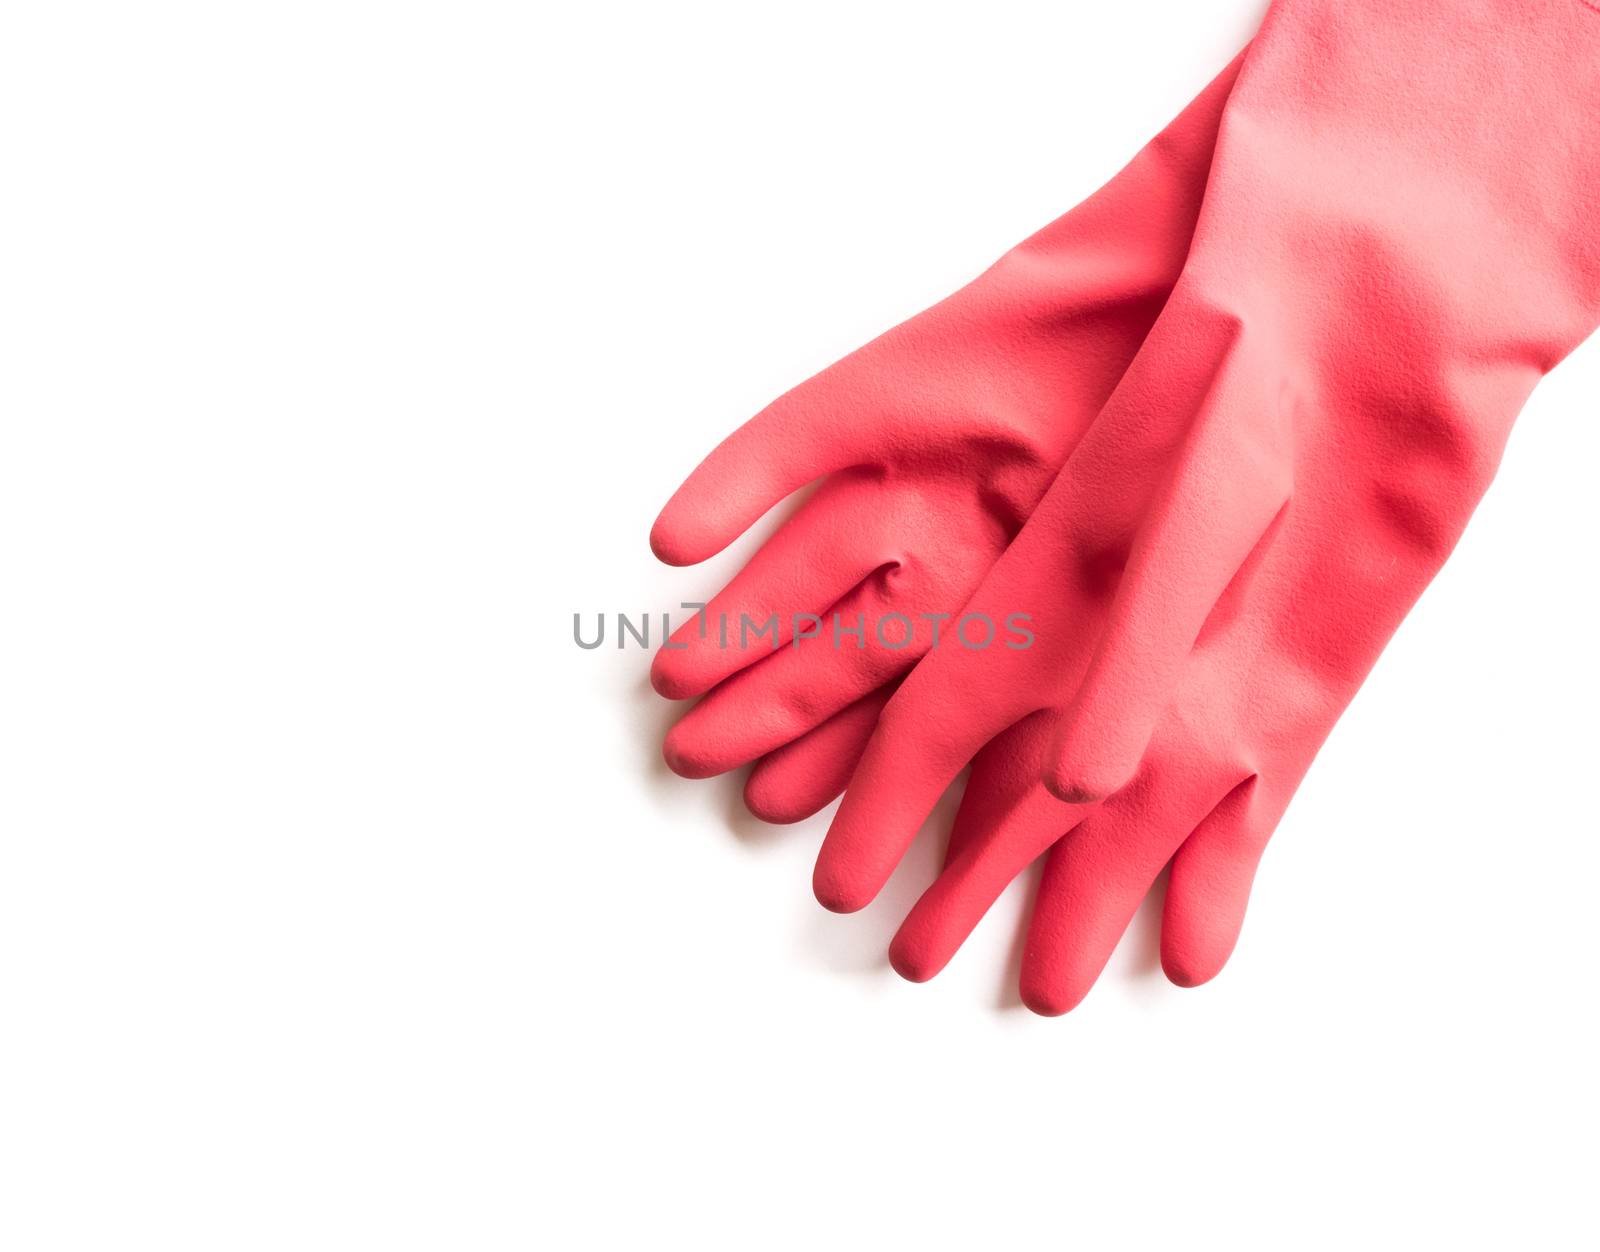 Closeup Red rubber gloves for cleaning on white background, workhouse concept